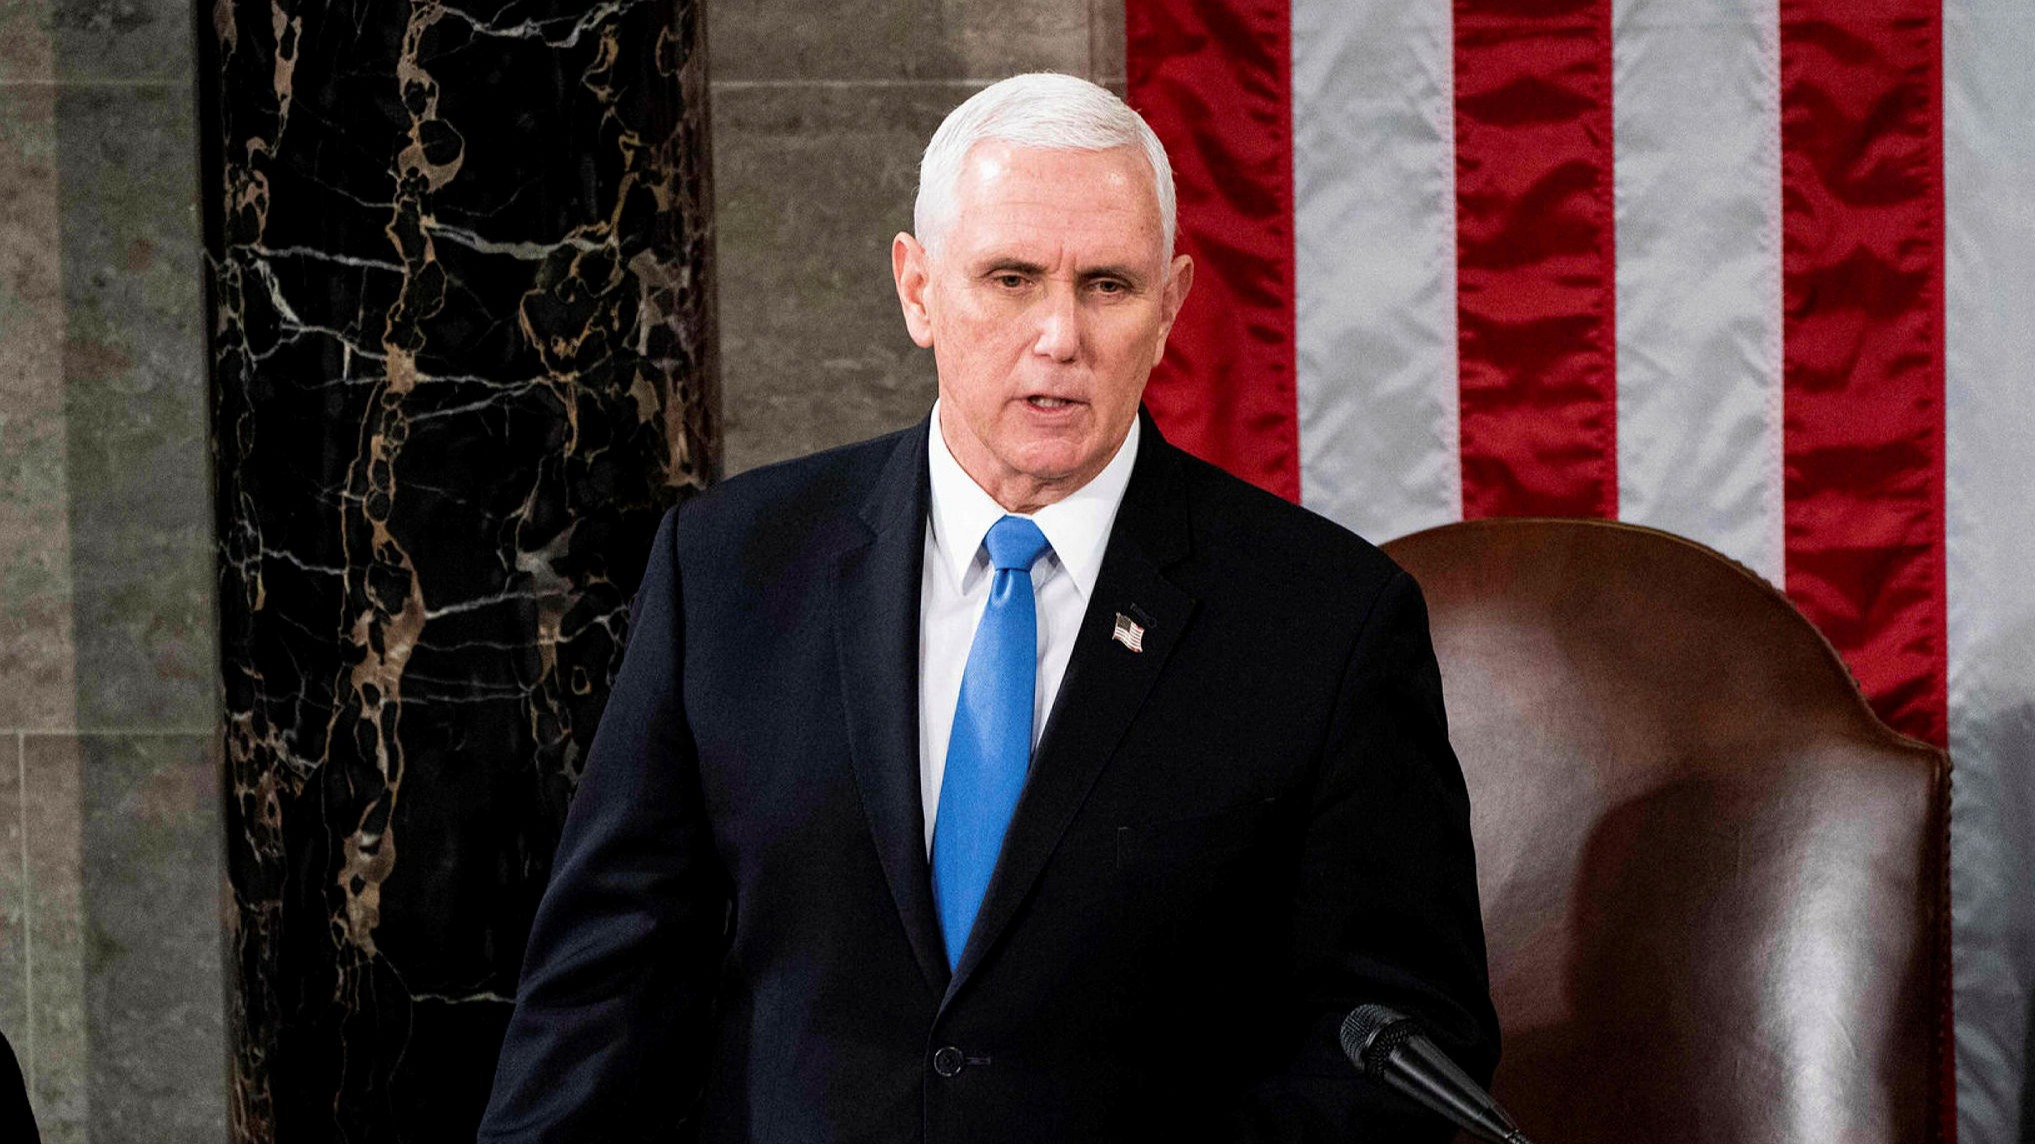 are you smiling right now because you genuinely like mike pence